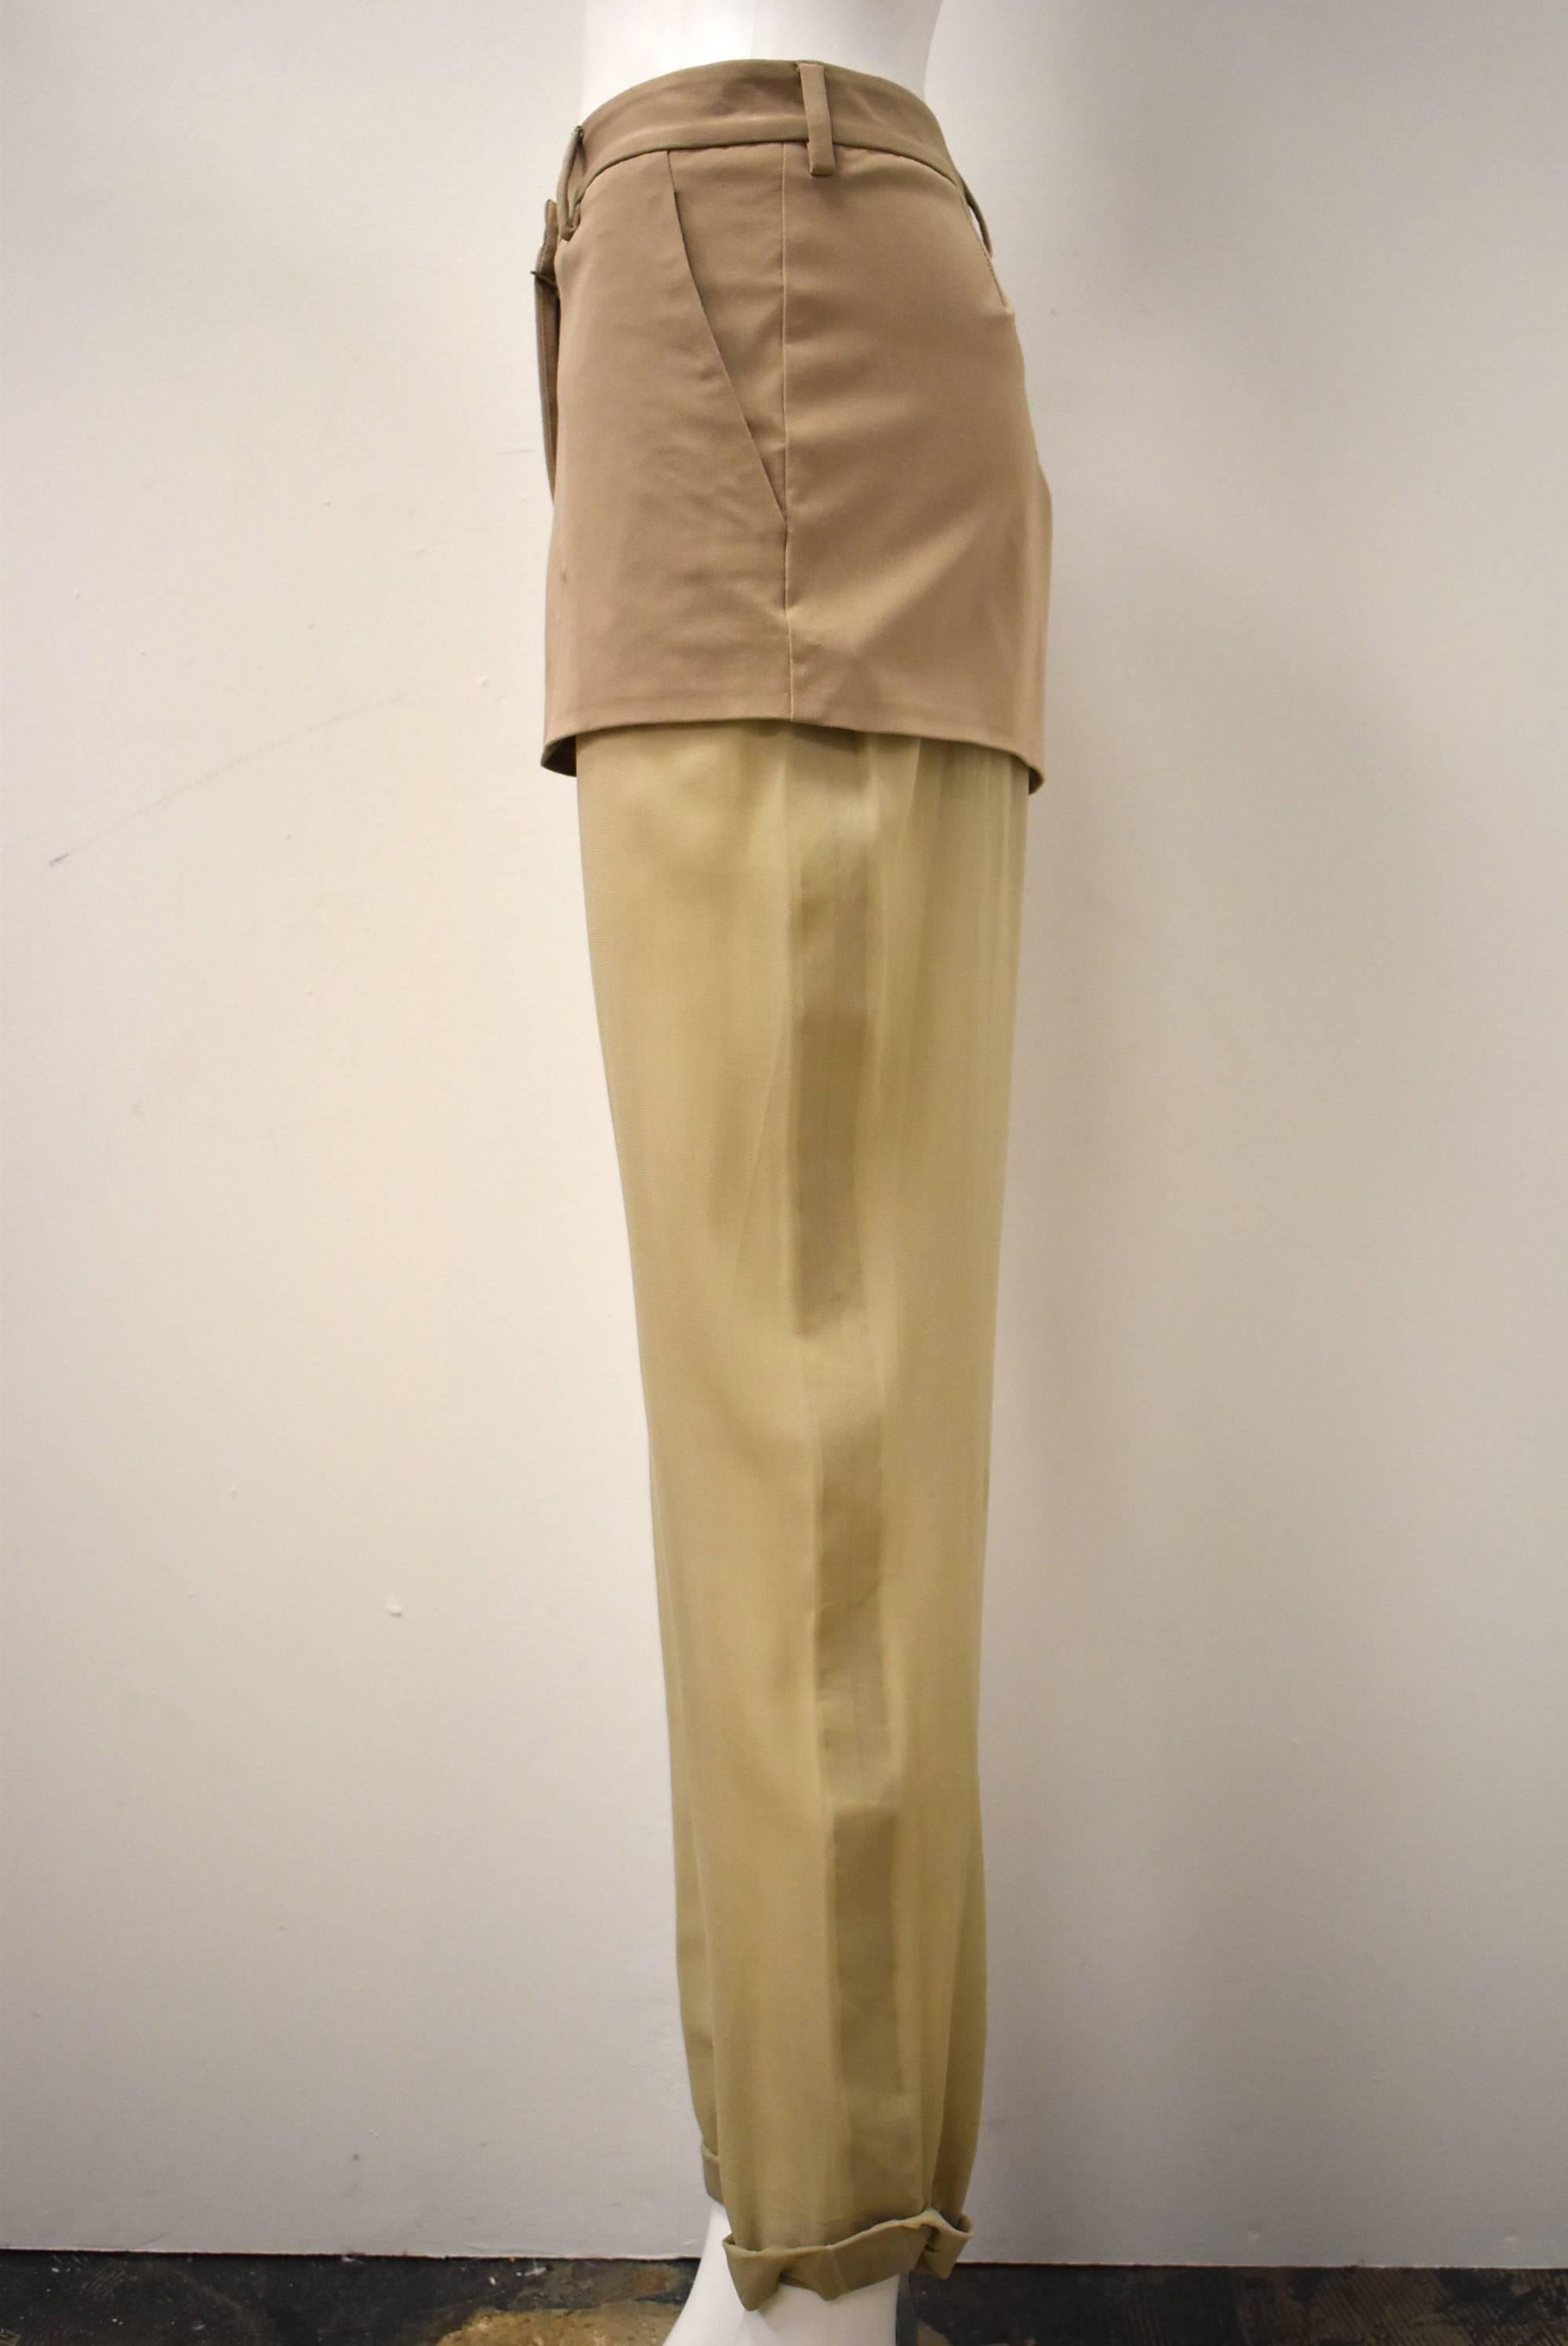 Brown Maison Martin Margiela Trousers/Shorts with Sheer Details